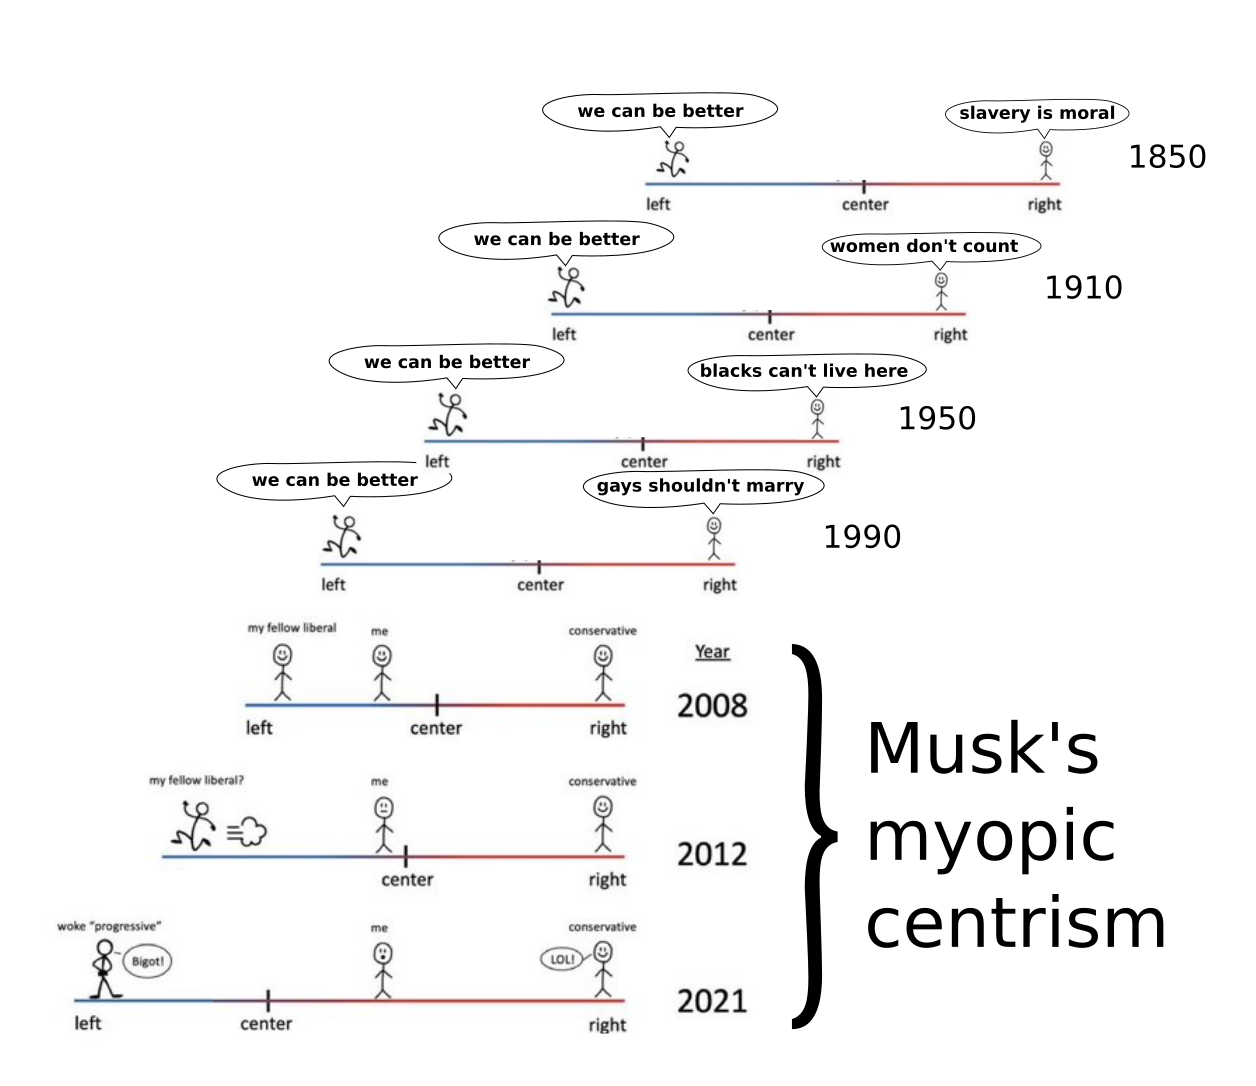 Expansion of Musk's timeline meme to include political spectrum lines dating back to the 19th century, each line further to the right as time goes backwards. On each line there is someone on the right end saying something that is obviously backwards and morally repugnant but was acceptable at that time. On the left, there is someone walking leftward saying 'We can do better.' For 1990, the right-wing person is saying 'gays shouldn't marry.' 1950='blacks can't live here' 1910='women don't count', 1850='slavery is moral'